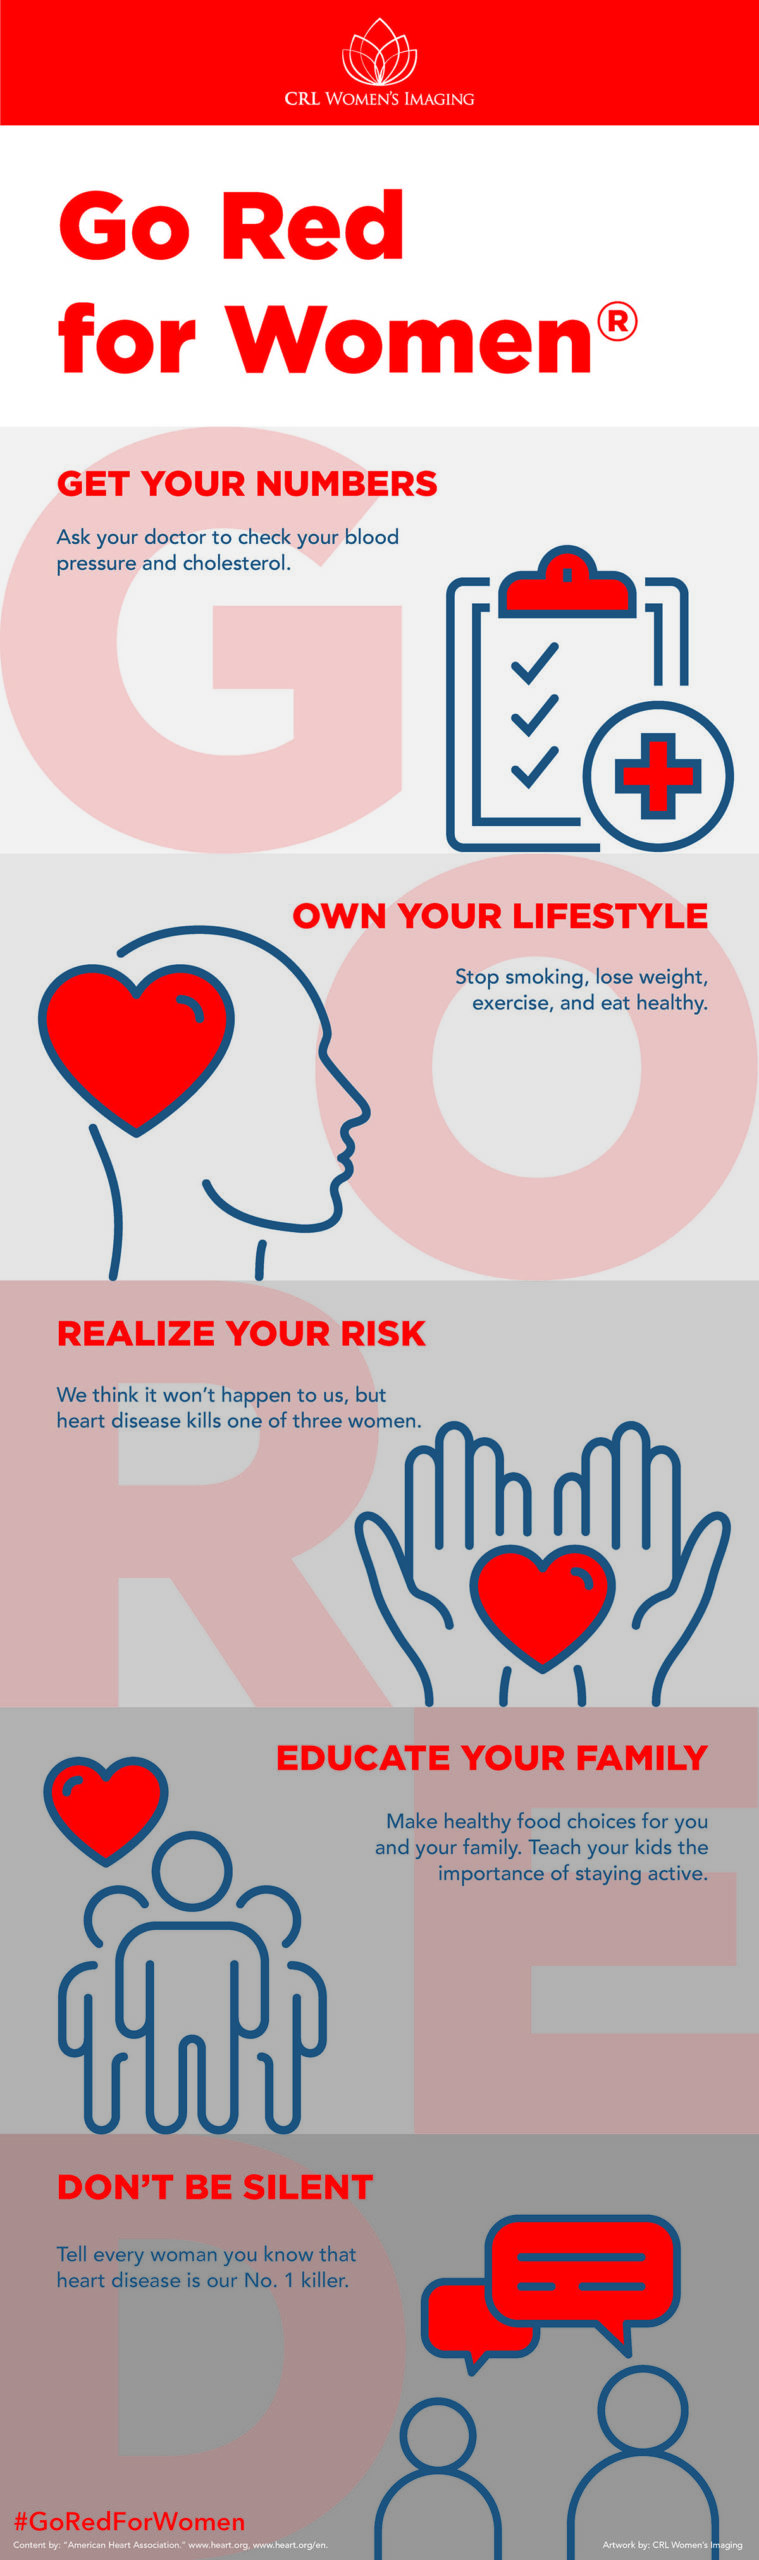 Go Red For Women Infographic